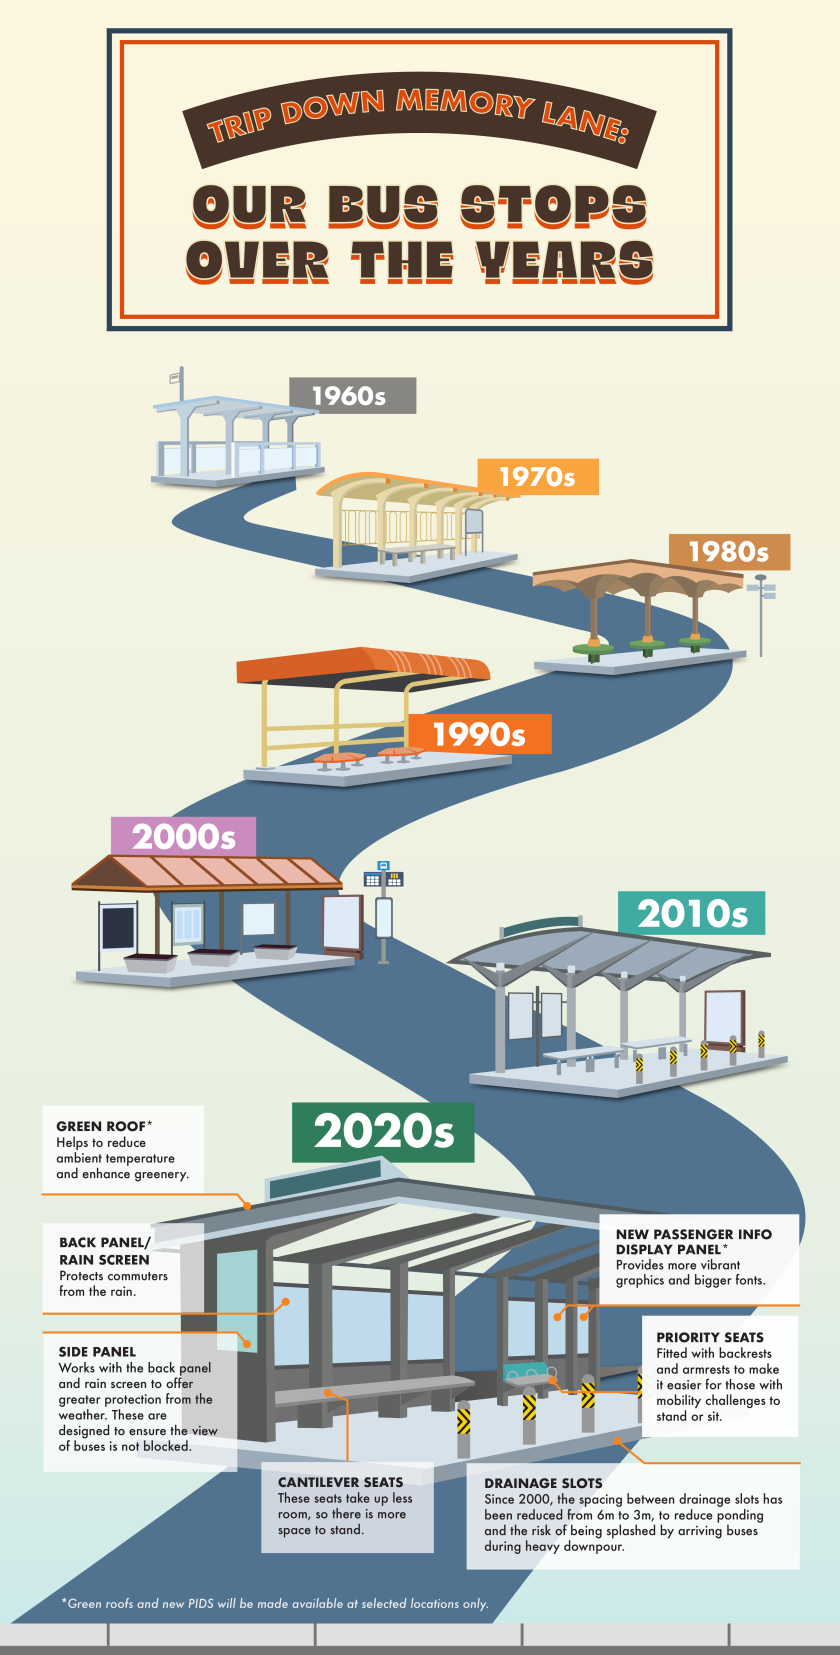 Image of milestones of the evolution of the bus stop shelter designs from 1960s to 2020s